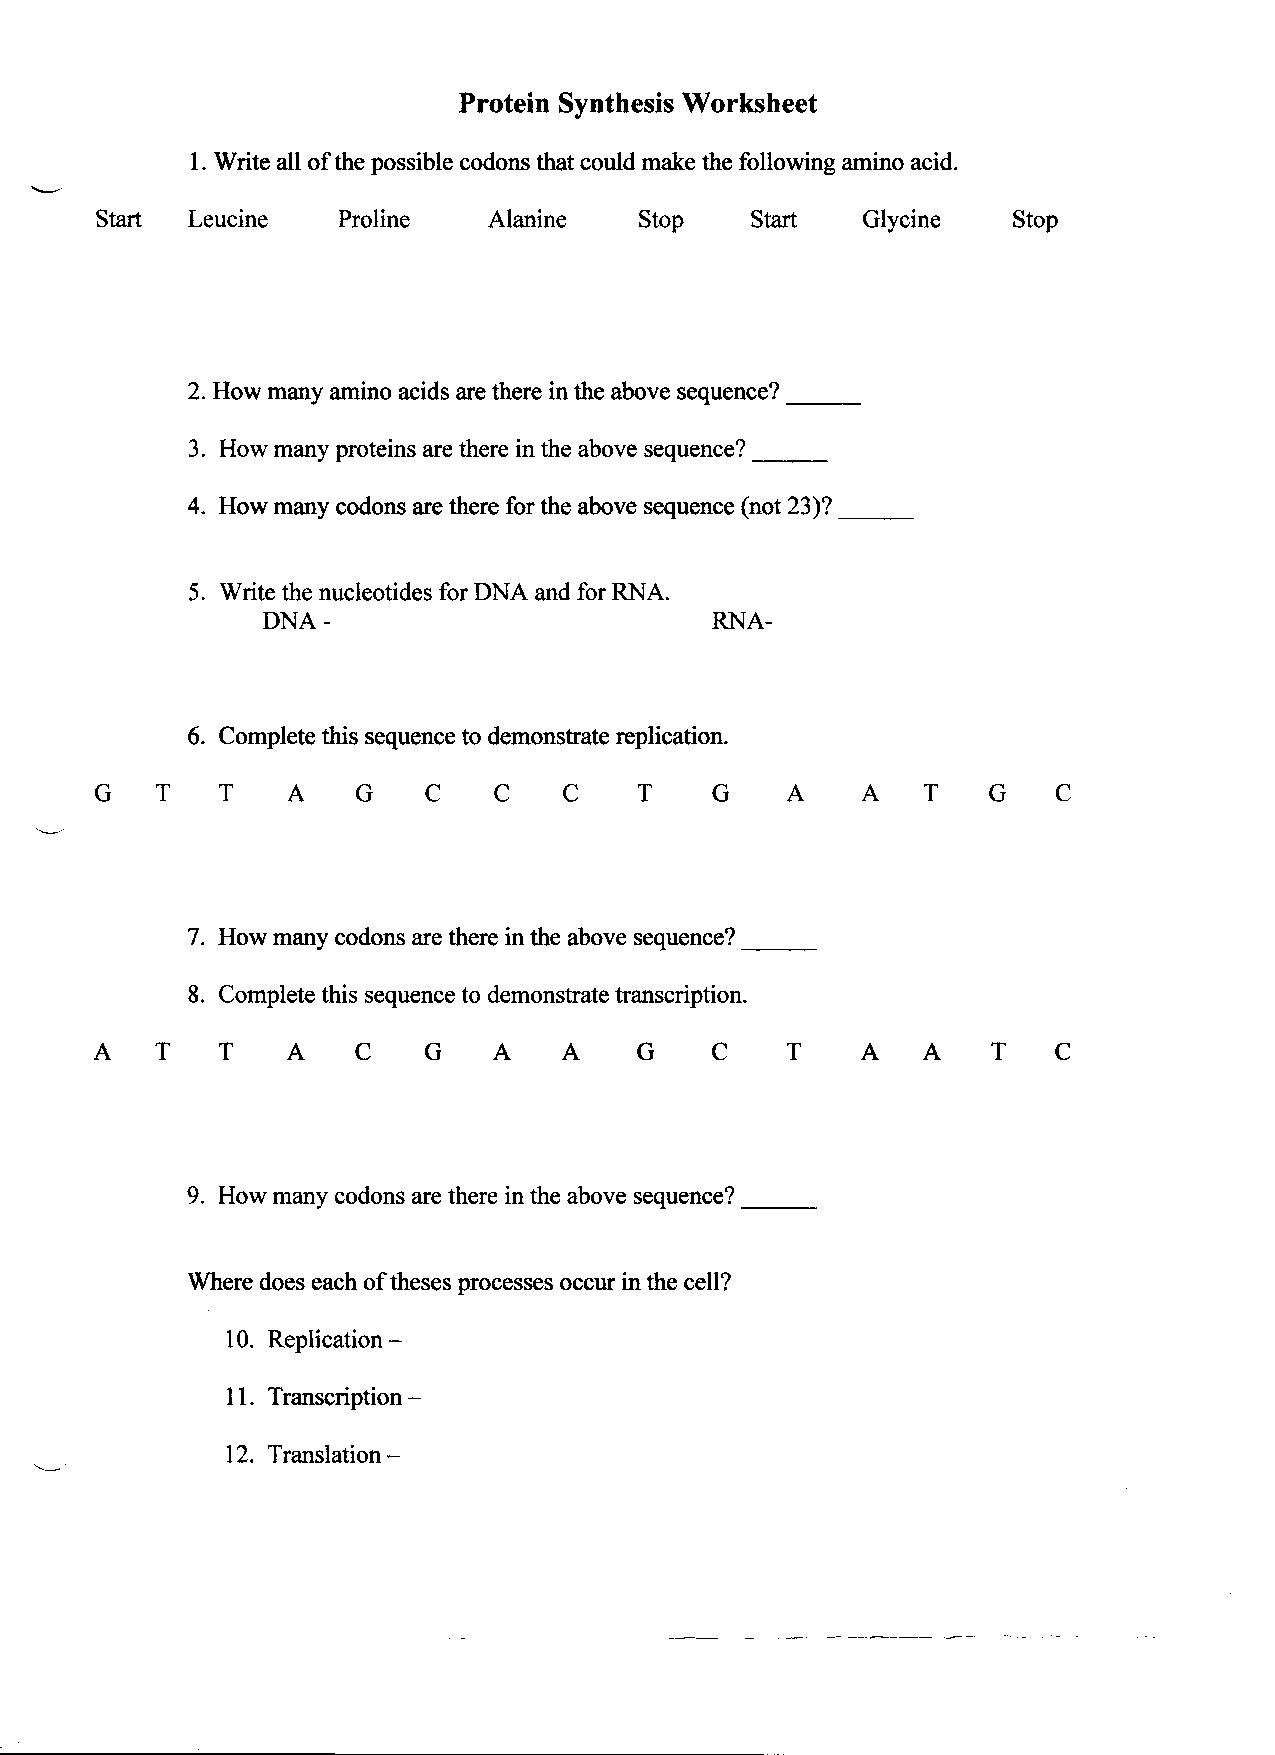 DNA and RNA Protein Synthesis Worksheet Answers Image